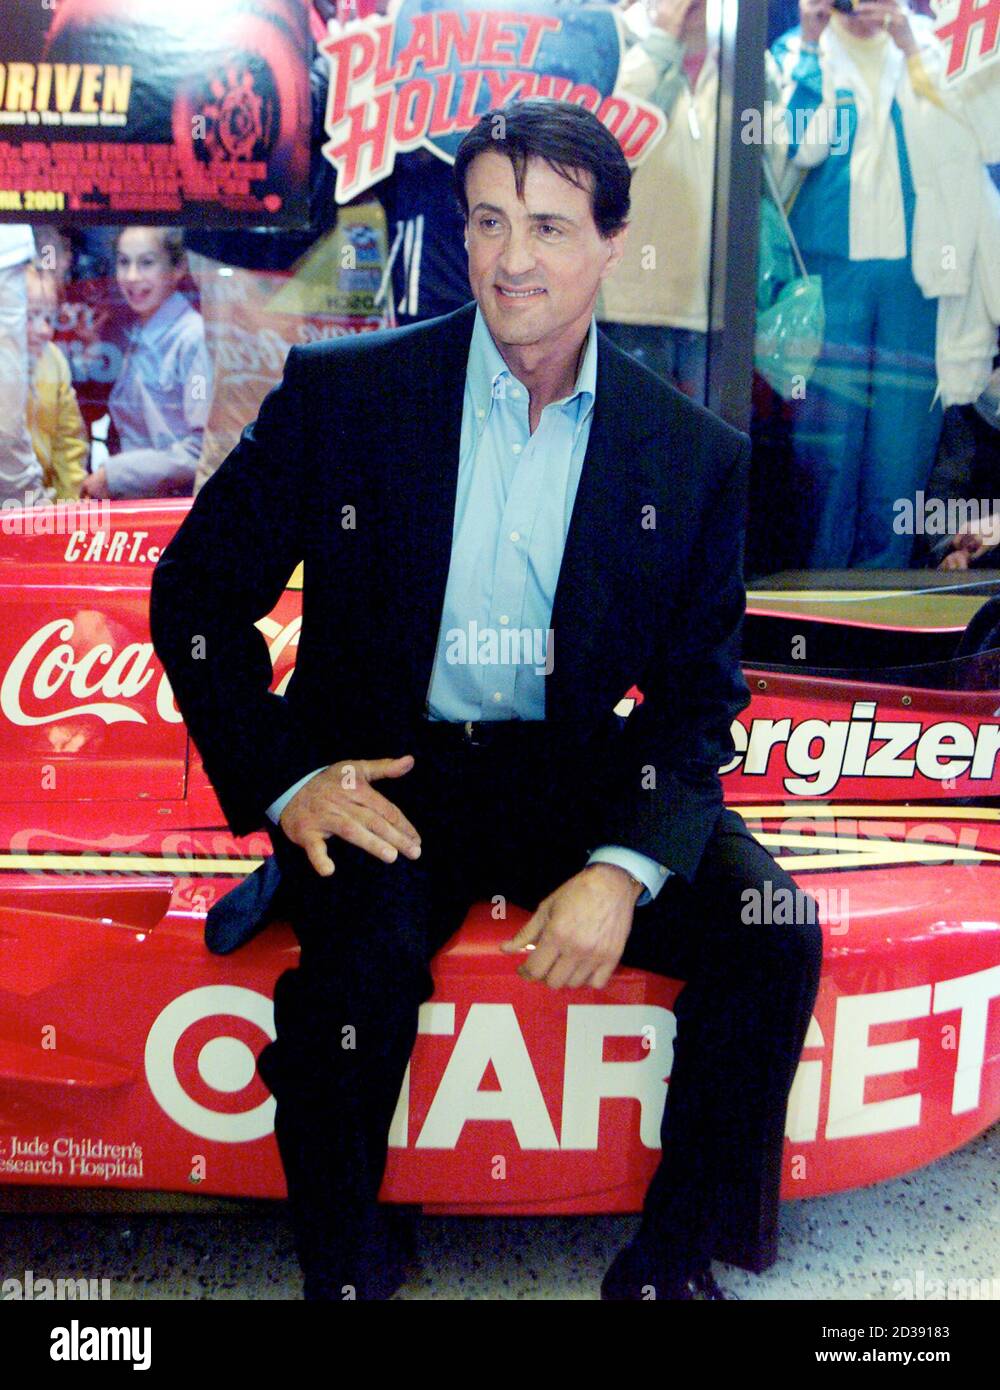 Sylvester Stallone appears at Planet Hollywood in New York City to celebrate the opening of his car racing drama "Driven" April 26, 2001. "Driven" opens in theaters nationwide April 27th.  SS/JP Stock Photo